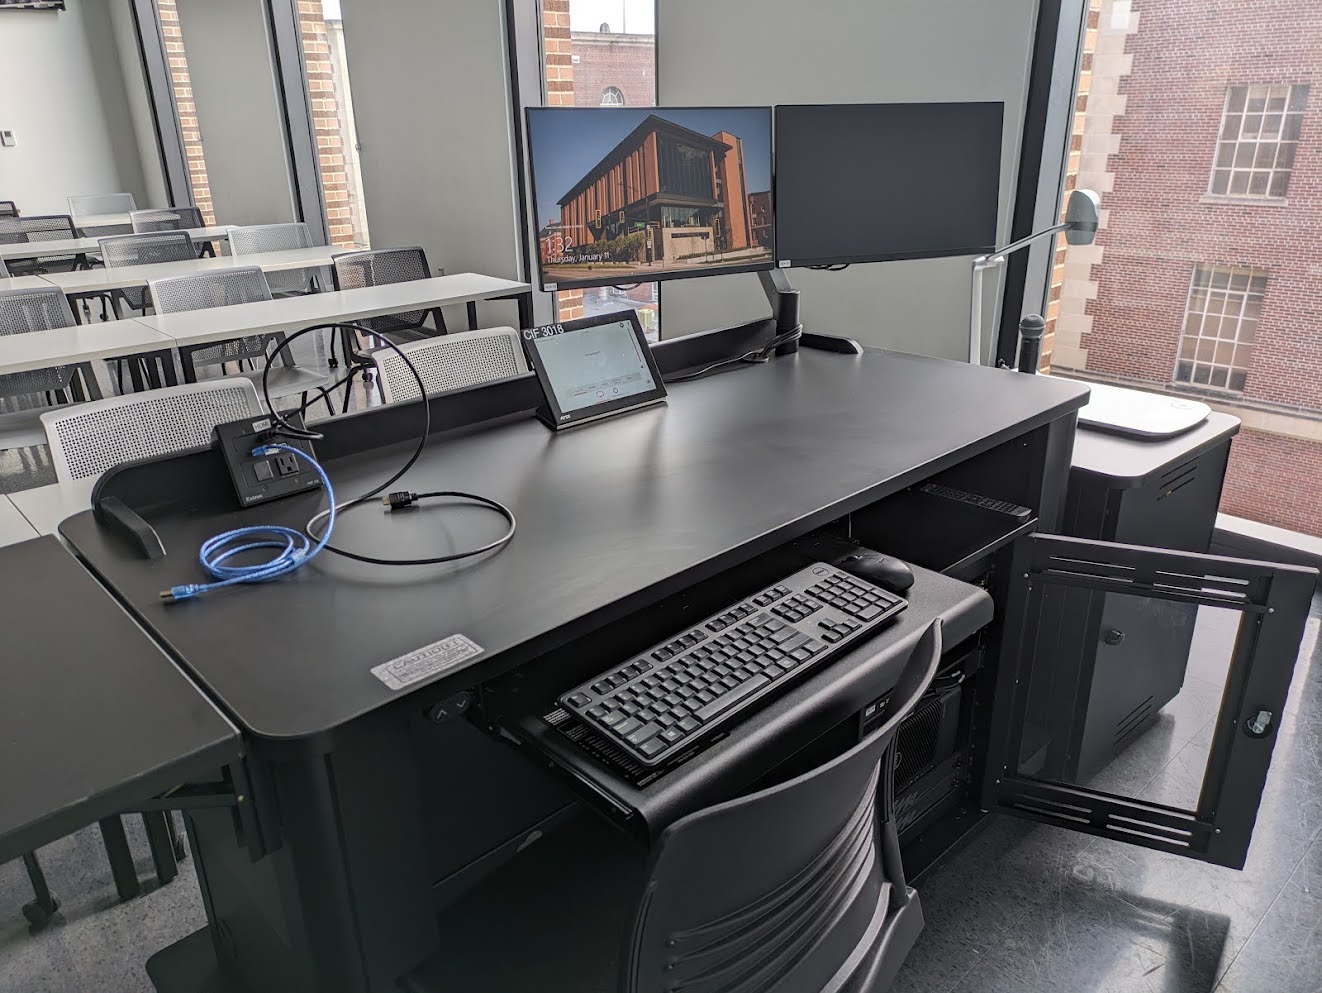 The instructor table with the control panel, keyboard, mouse, monitor, and microphone on top and the PC and sound equipment mounted underneath.